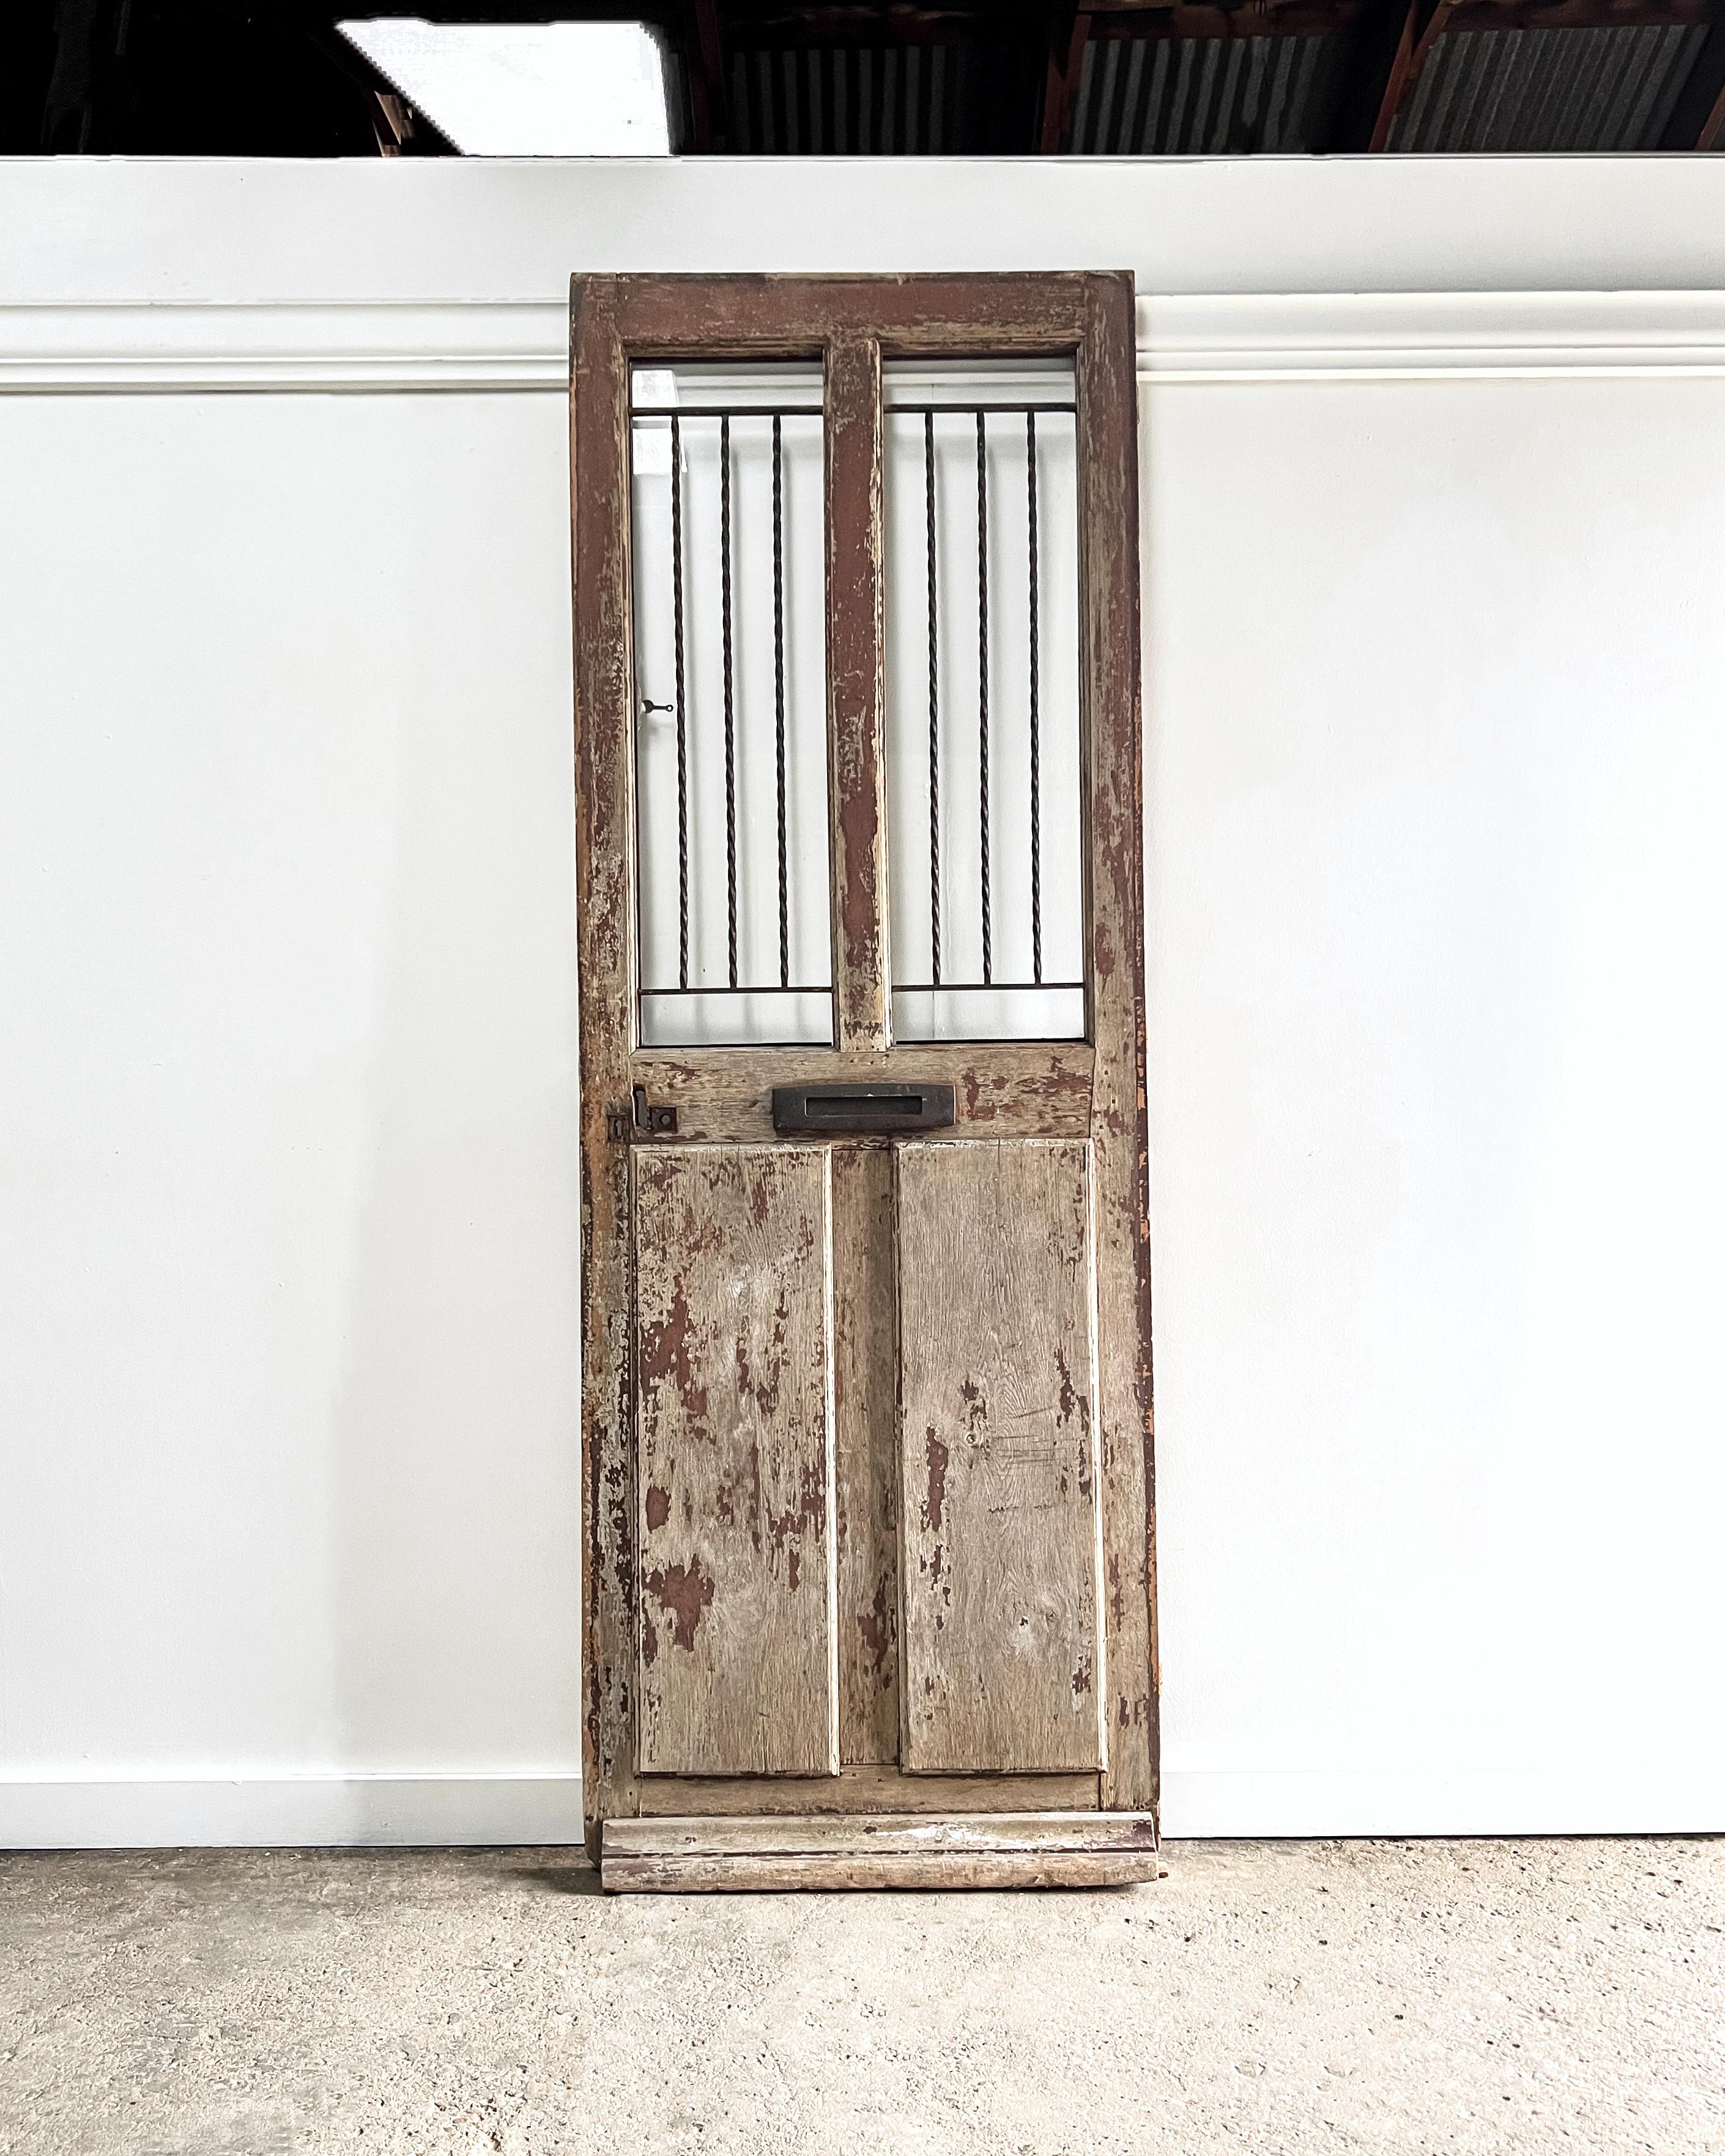 Reclaimed French 2 lite over 2-panel configuration exterior door with window grille and mail slot. Featuring a unique design with an inset grille and window that swings open, the door will add old-world charm and character to your modern